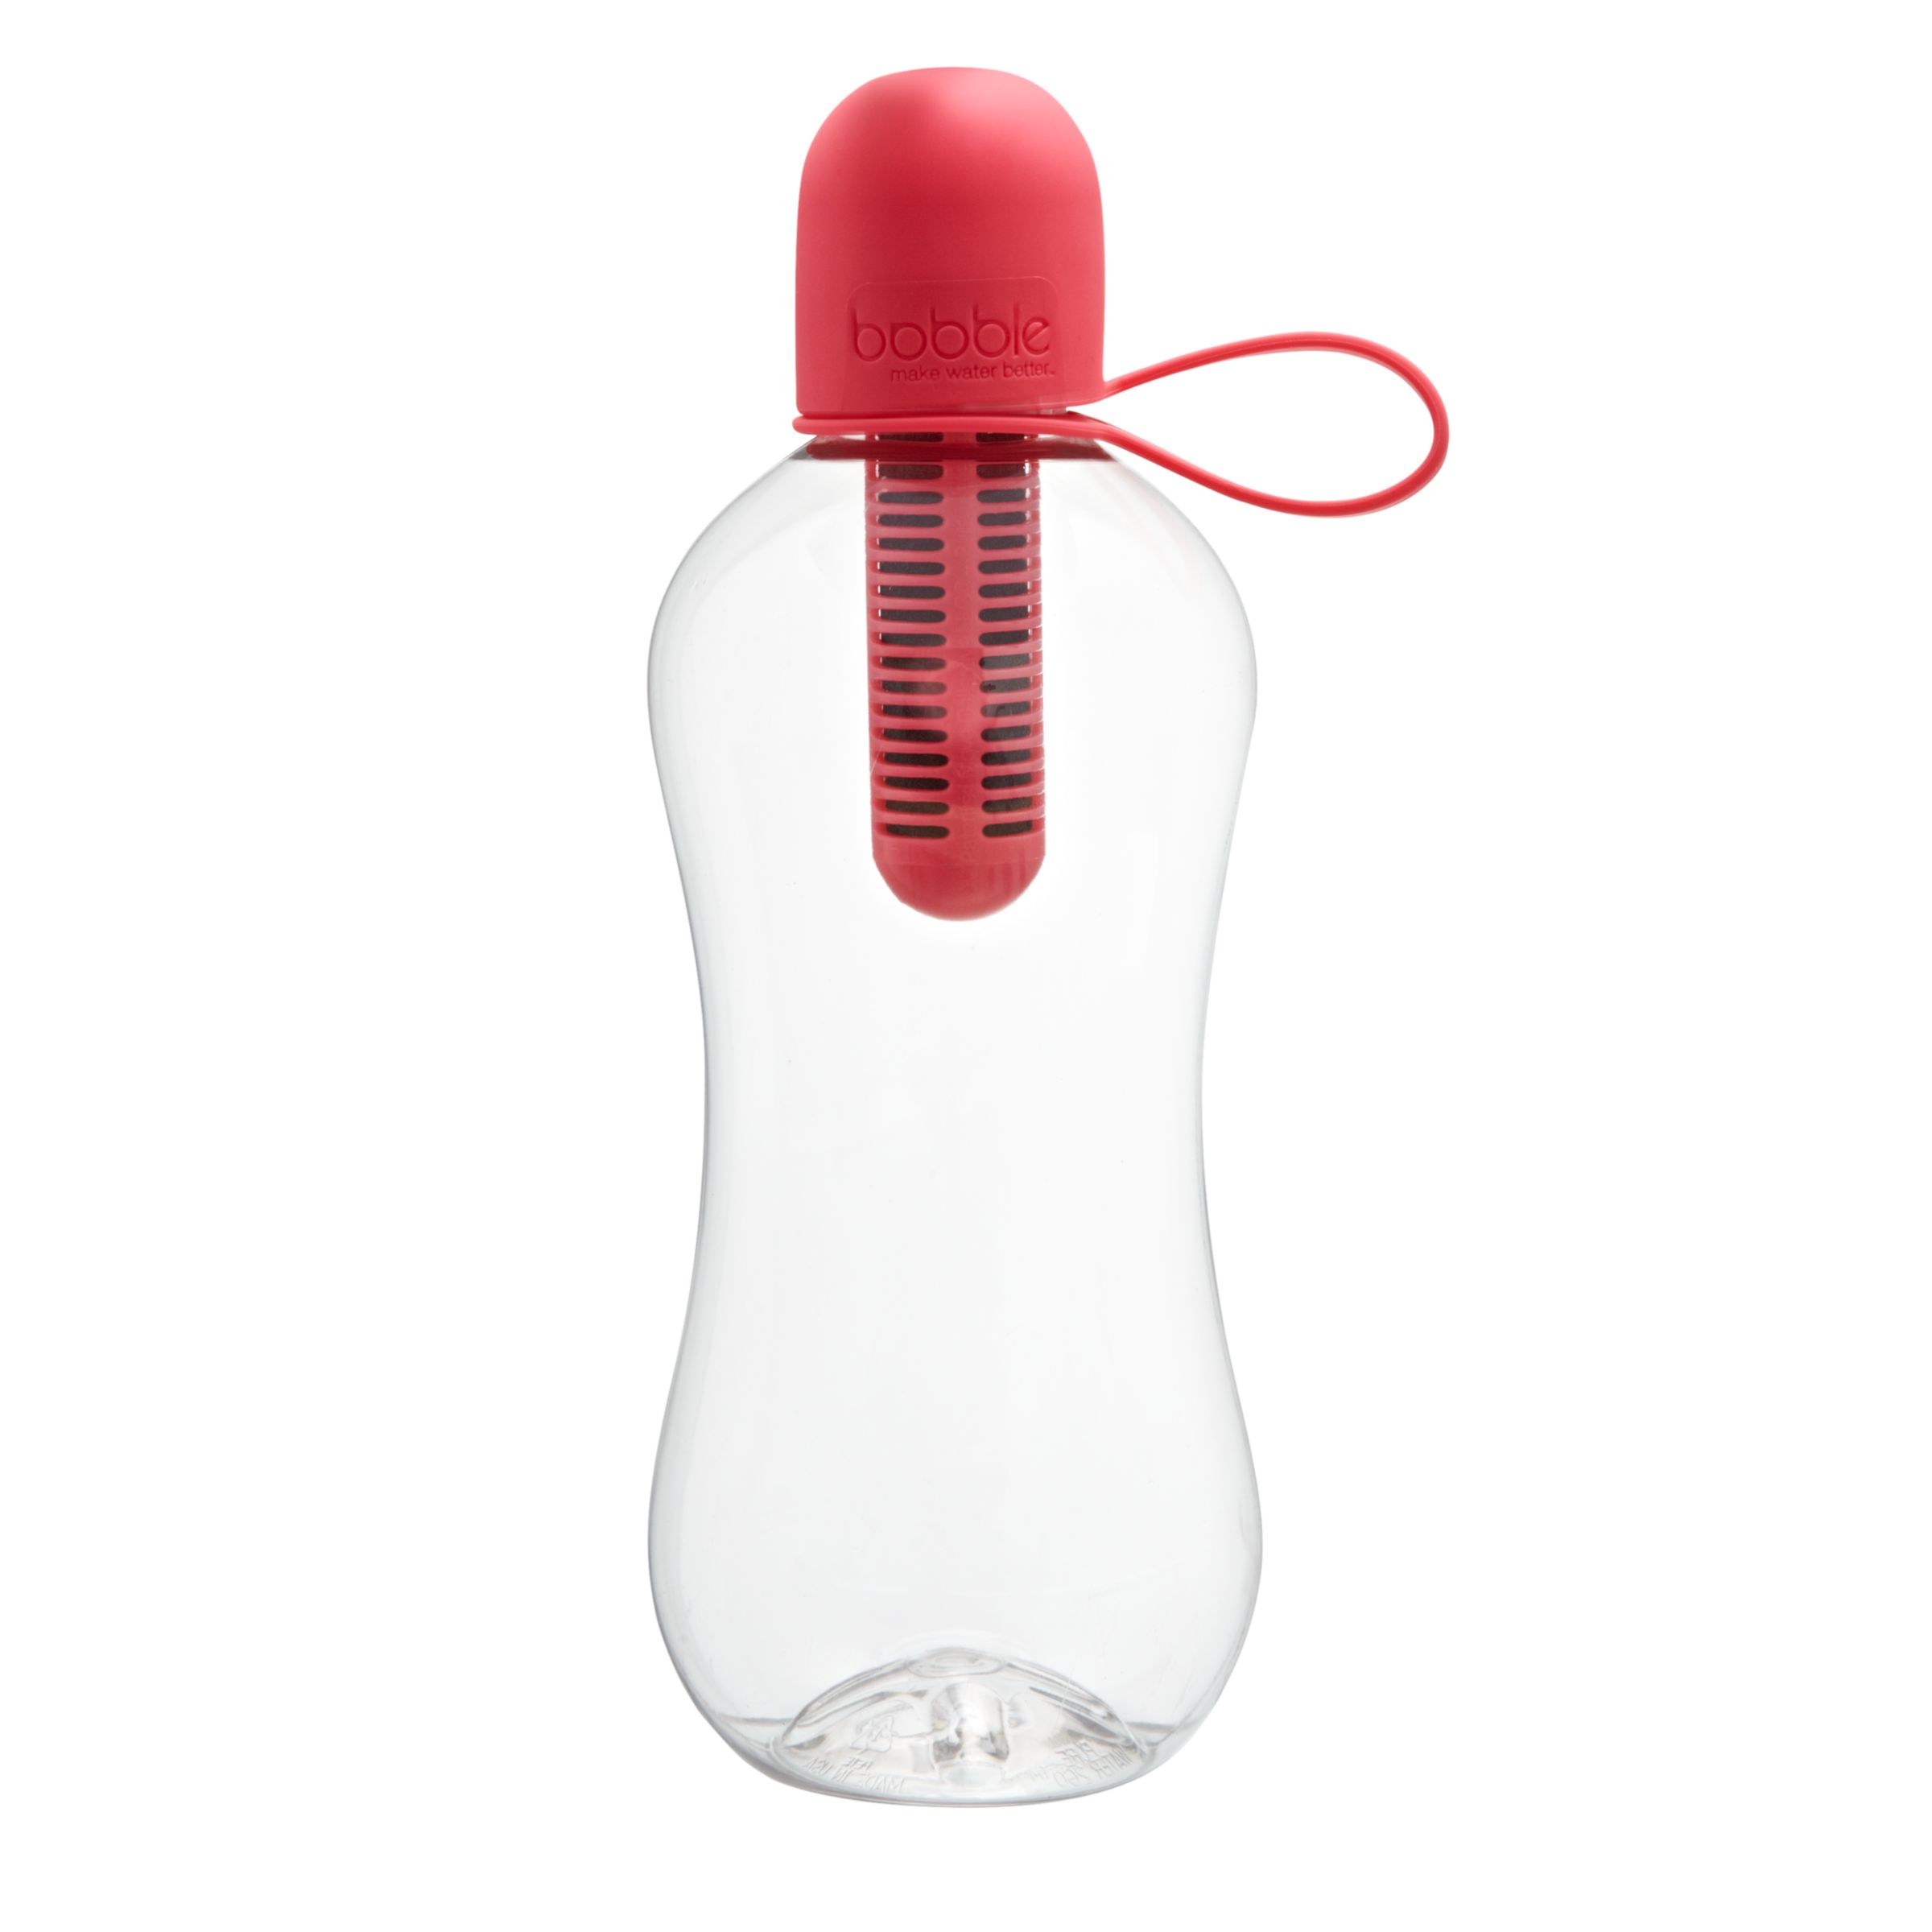 Bobble Water Bottle with Tether Cap, 550ml, Pink